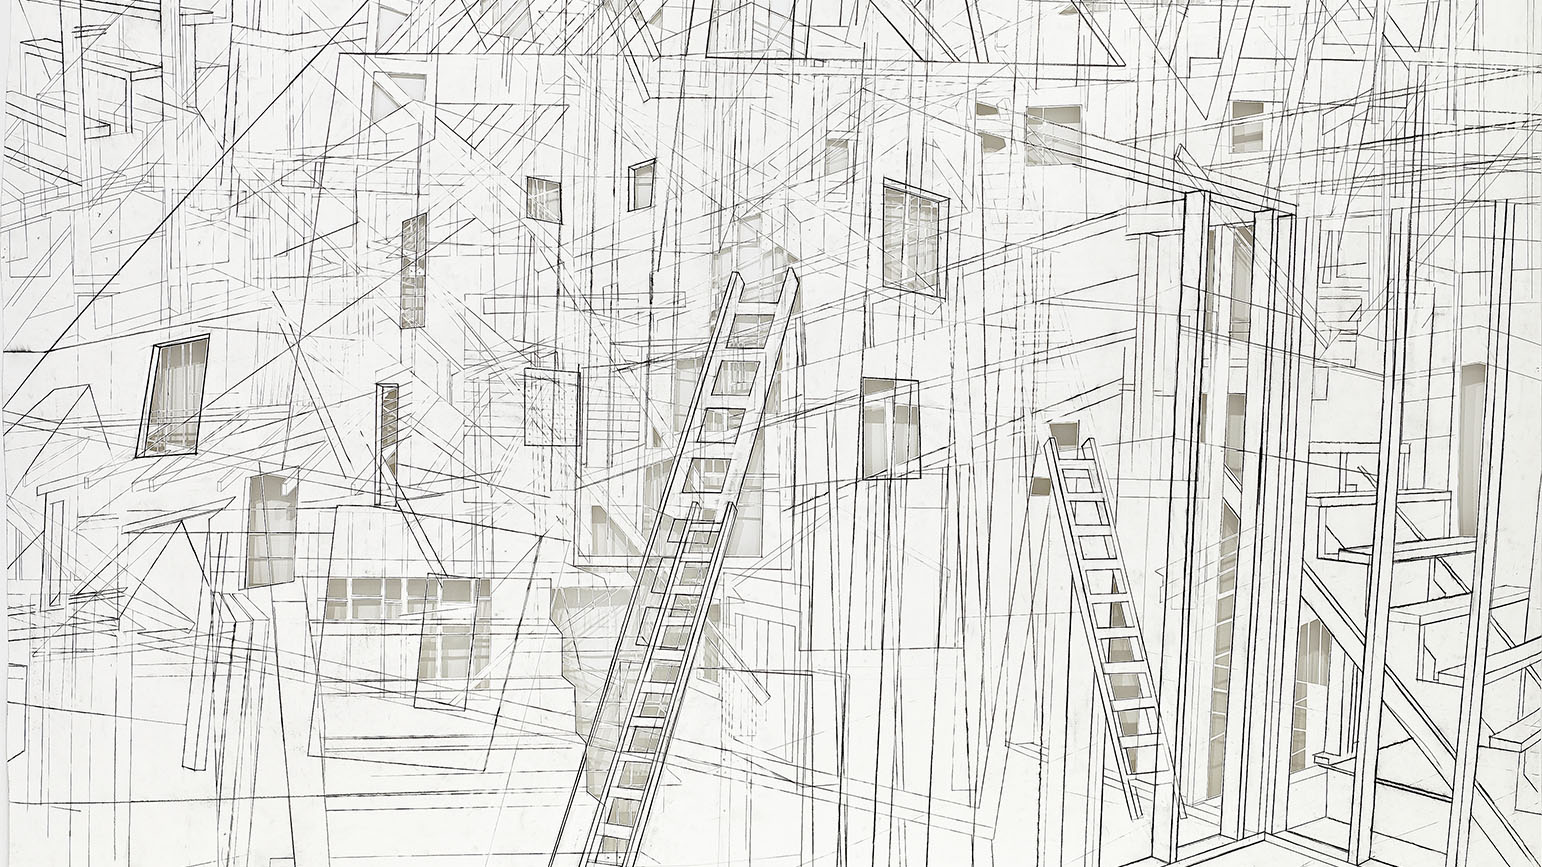 Drawing of a construction site from multiple simultaneous angles